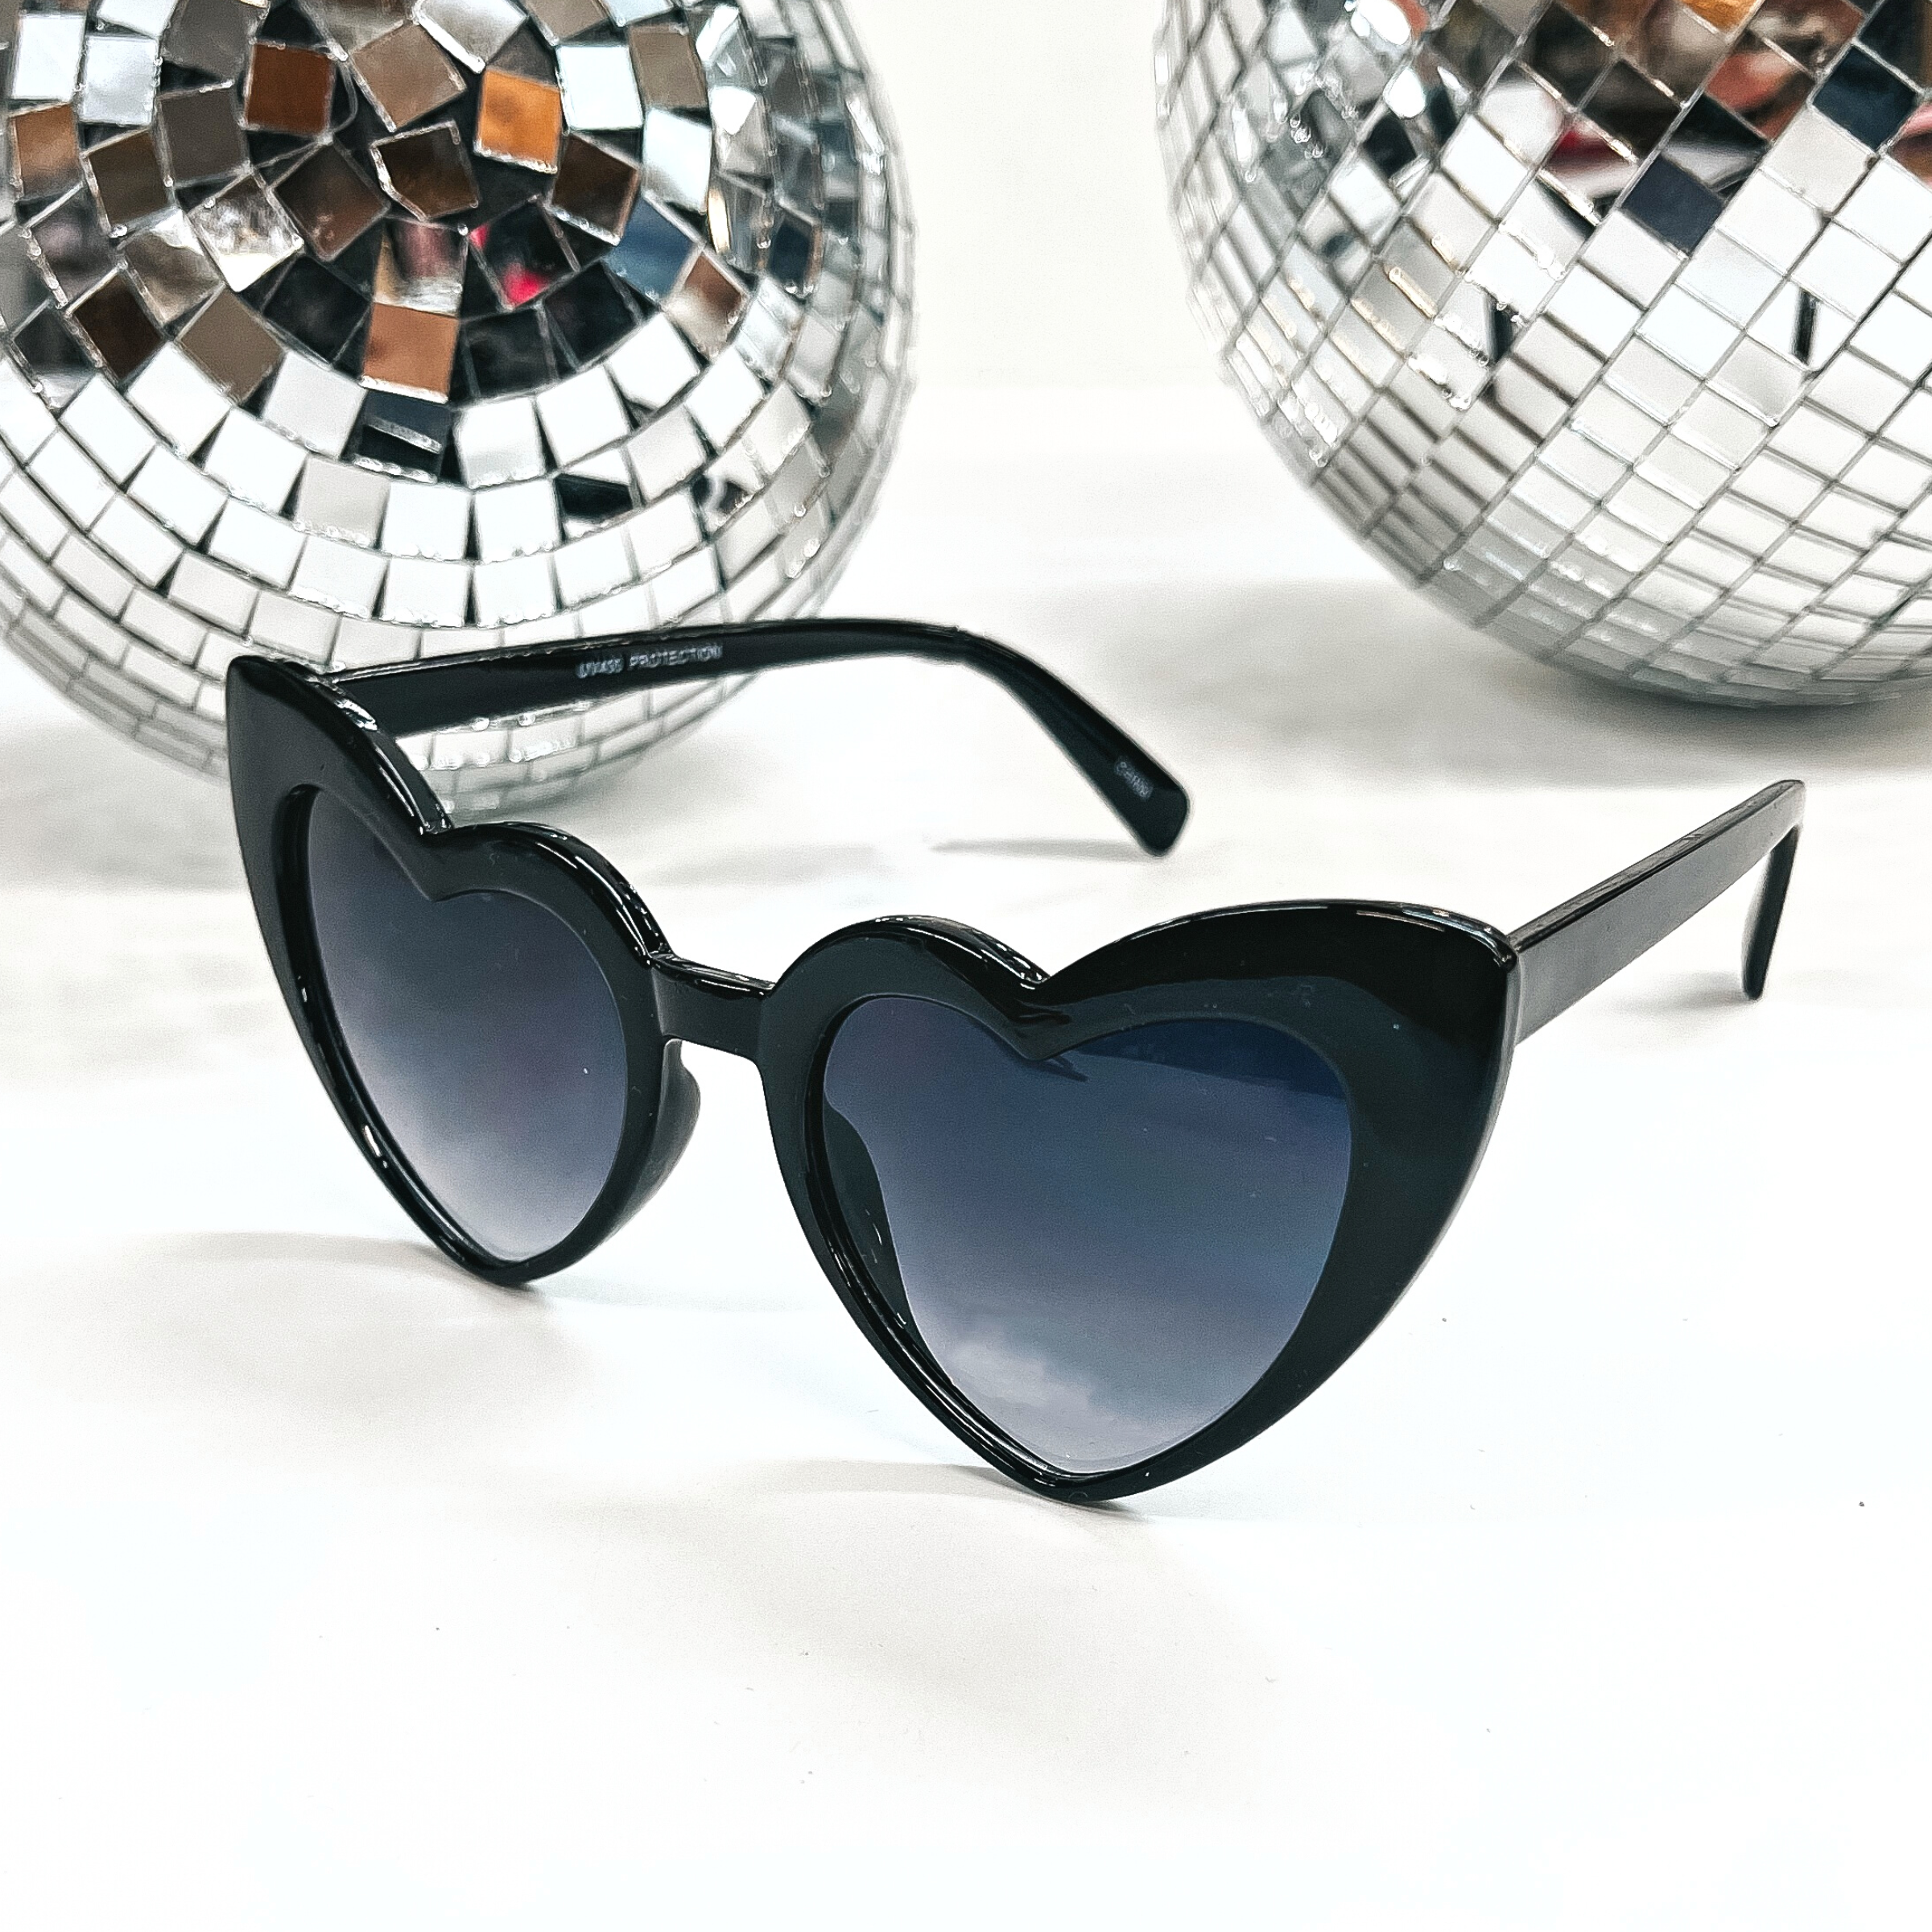 These are heart shaped sunglasses in black with black/dark grey lenses. These sunglasses are taken on a white background with two silver disco balls in the back as decor.